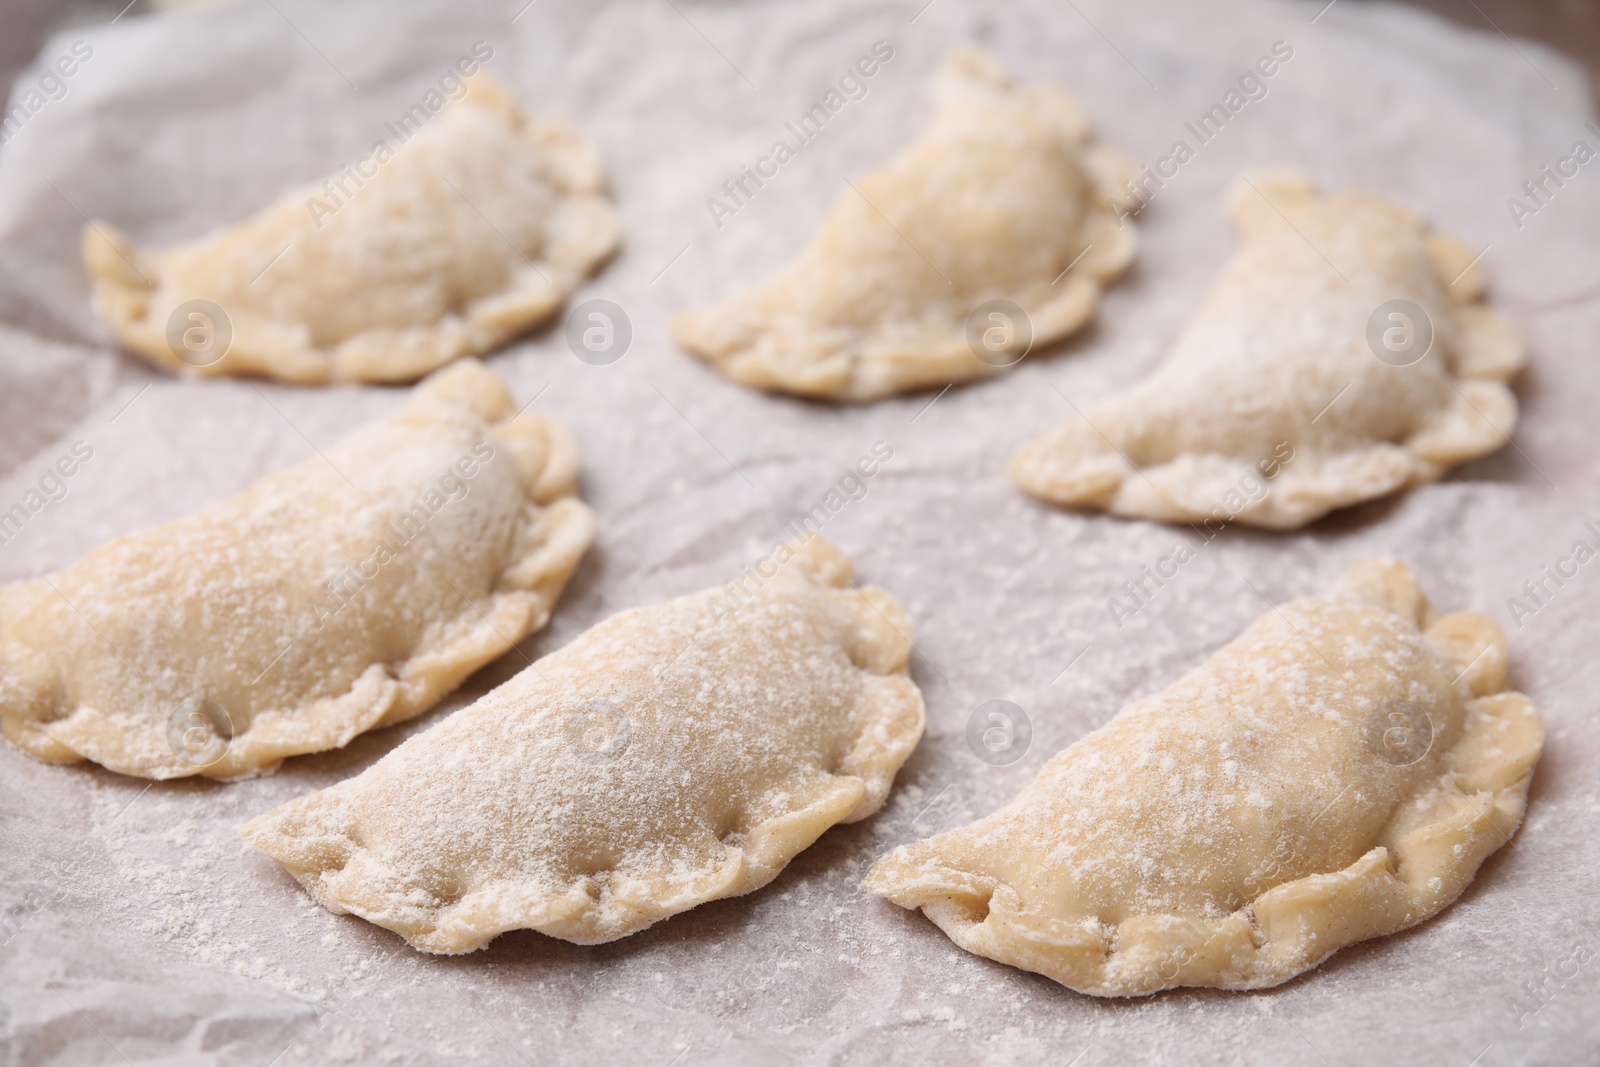 Photo of Raw dumplings (varenyky) with tasty filling on parchment, closeup. Traditional Ukrainian dish